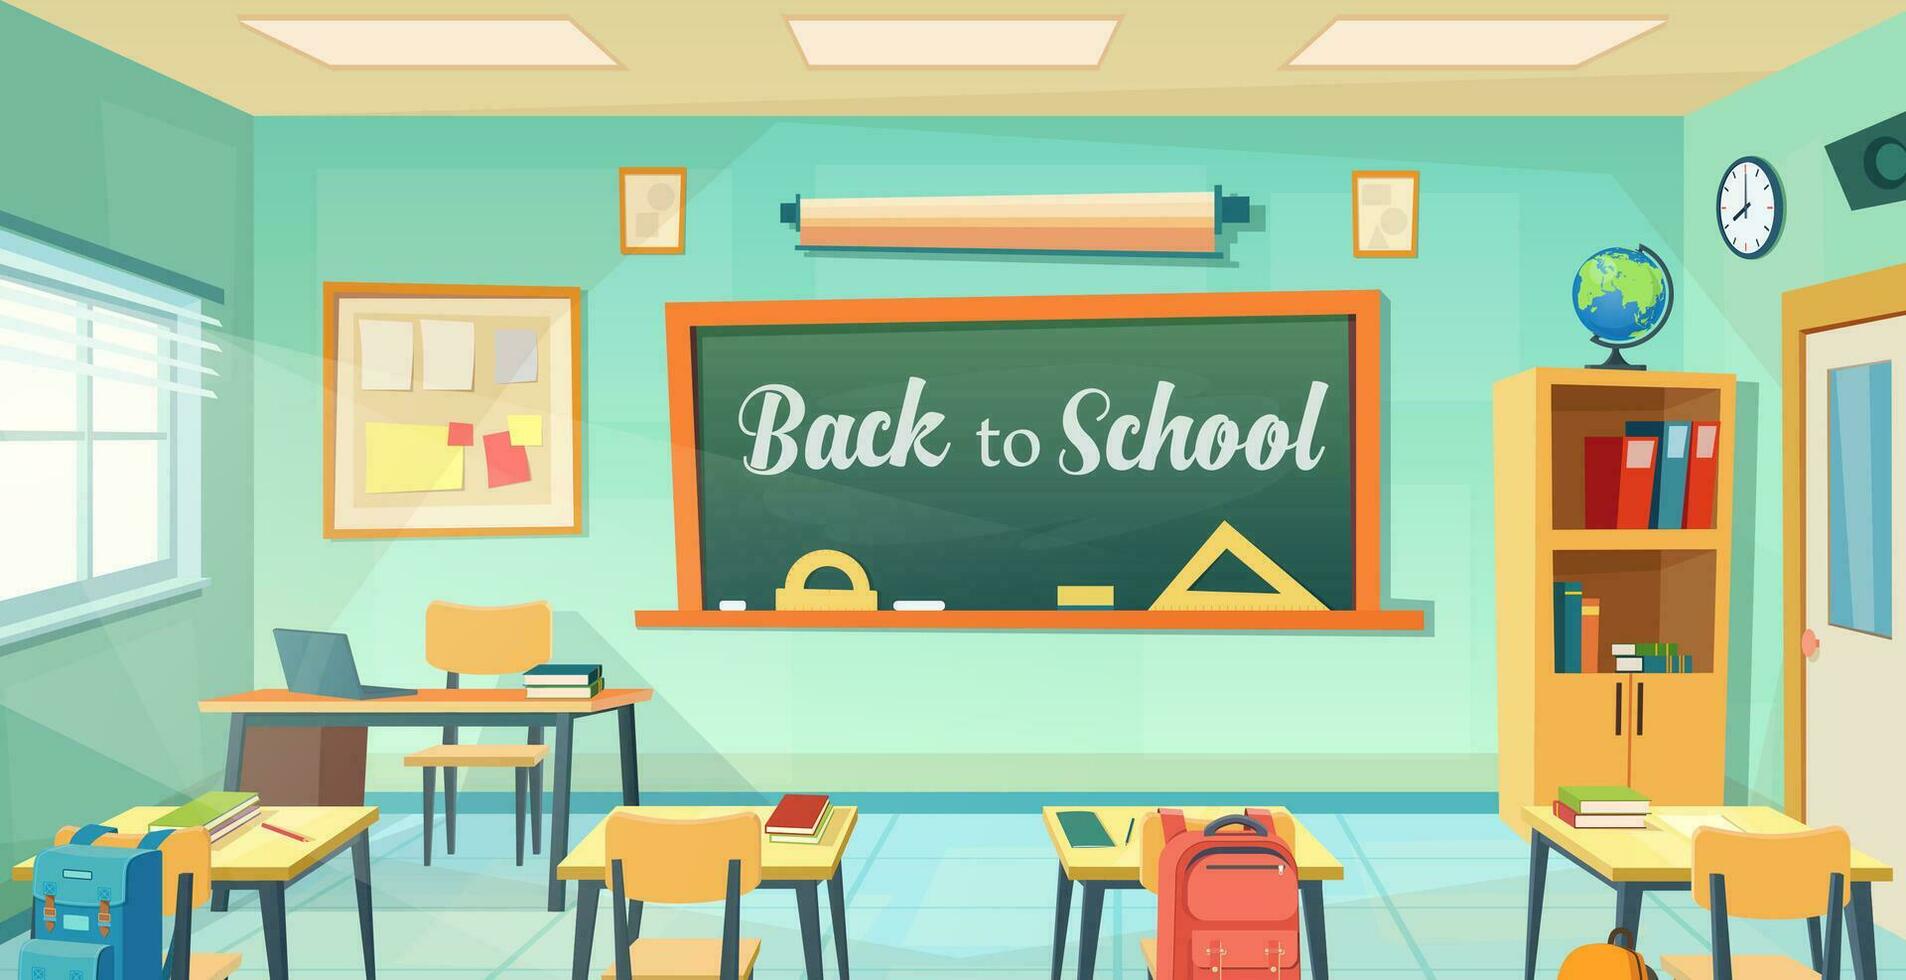 Empty school classroom cartoon . Back to school design template. Education concept. college or university training room with chalkboard, table, desks, chairs. Vector illustration in a flat style